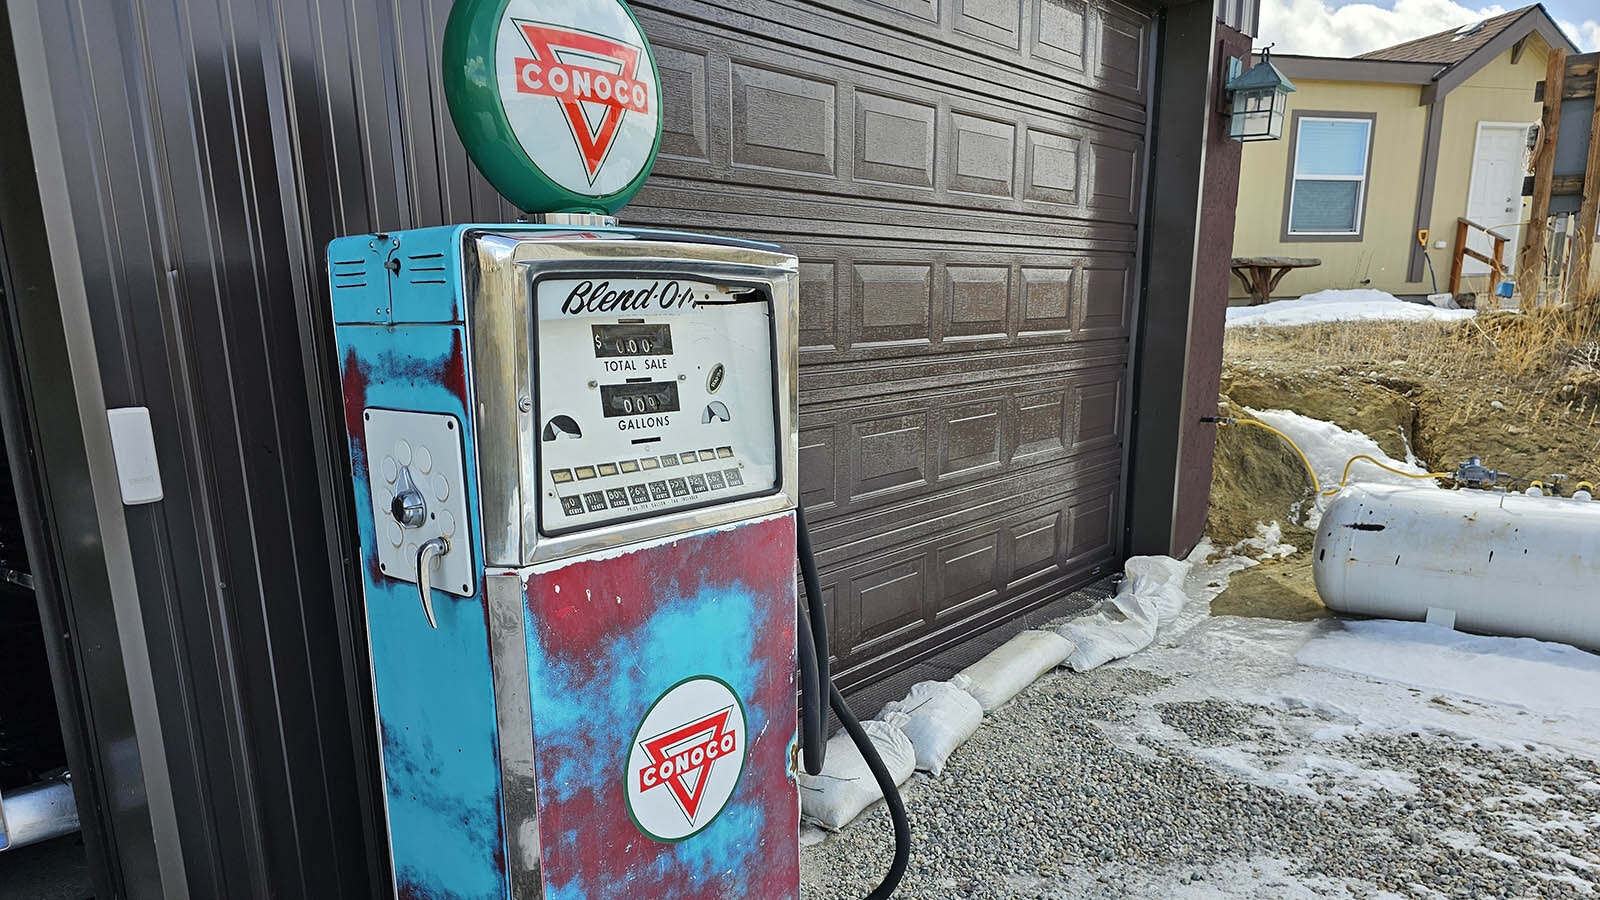 Another old gas pump, which still lights up at night.